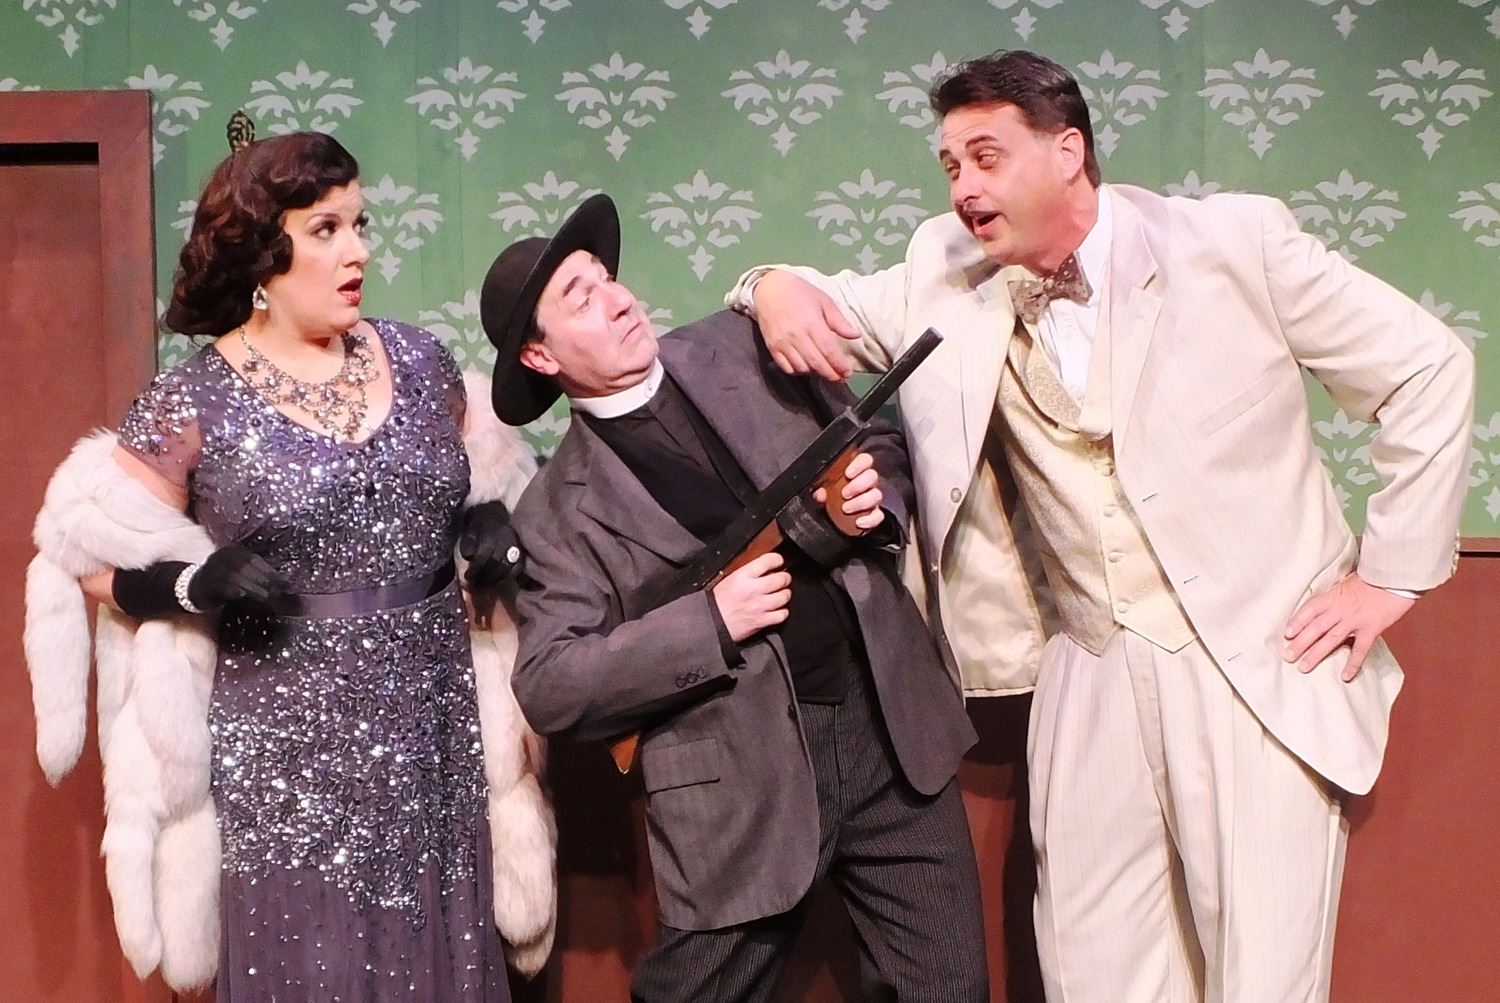 Comic antics ensue in Cole Porter’s musical comedy Anything Goes as Lord Evelyn Oakley (Tom Pagano of Clinton Twnp.) mixes up his American phrases to Moonface Martin (Michael A. Gravame of Detroit) as Reno Sweeney (Danielle Caralis of Birmingham) looks on in delight.